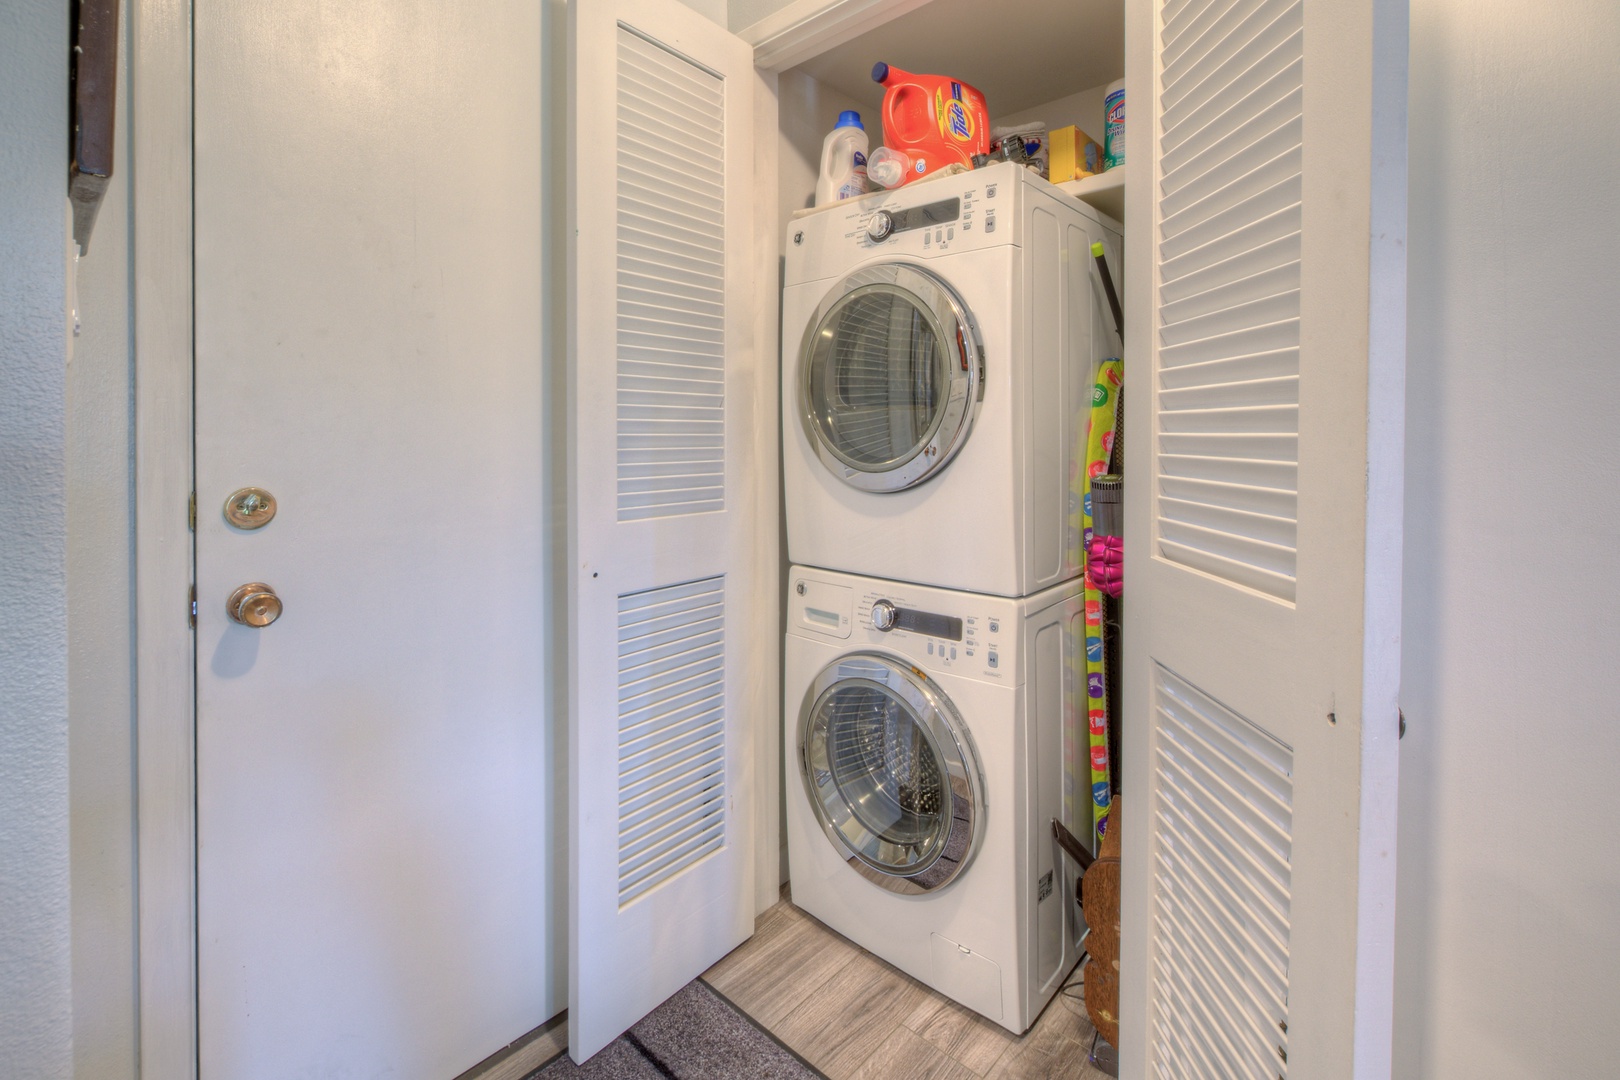 In unit washer and dryer. Complimentary detergent available.